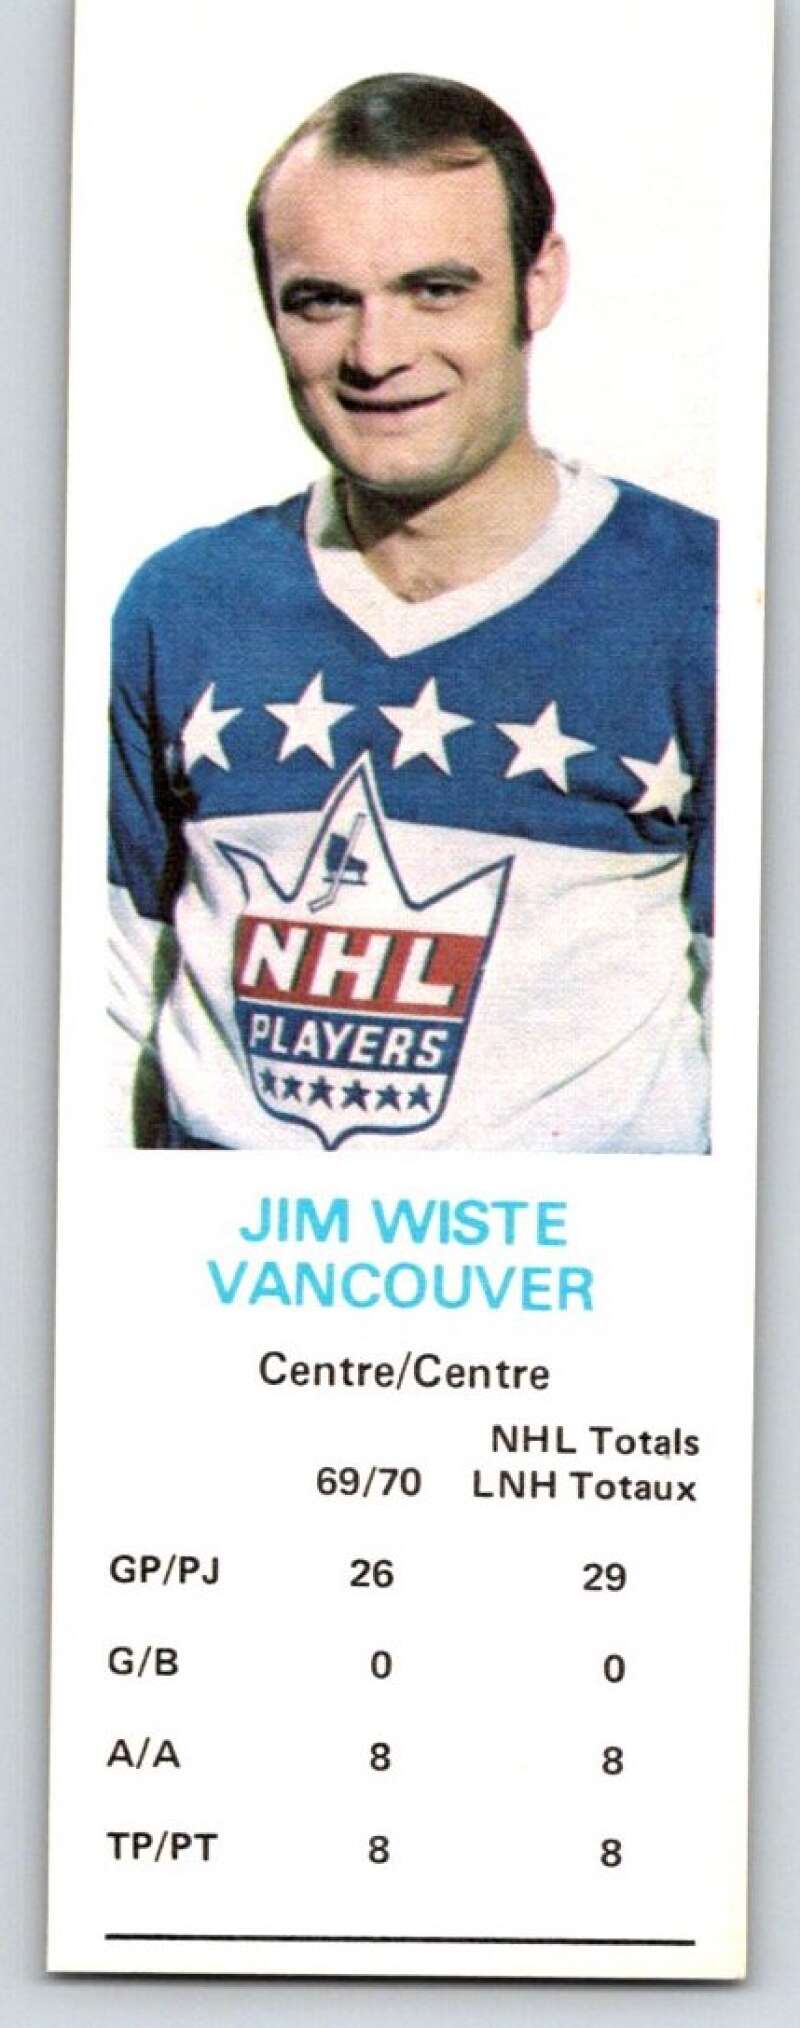 1970-71 Dad's Cookies #142 Jim Wiste  Vancouver Canucks  X433